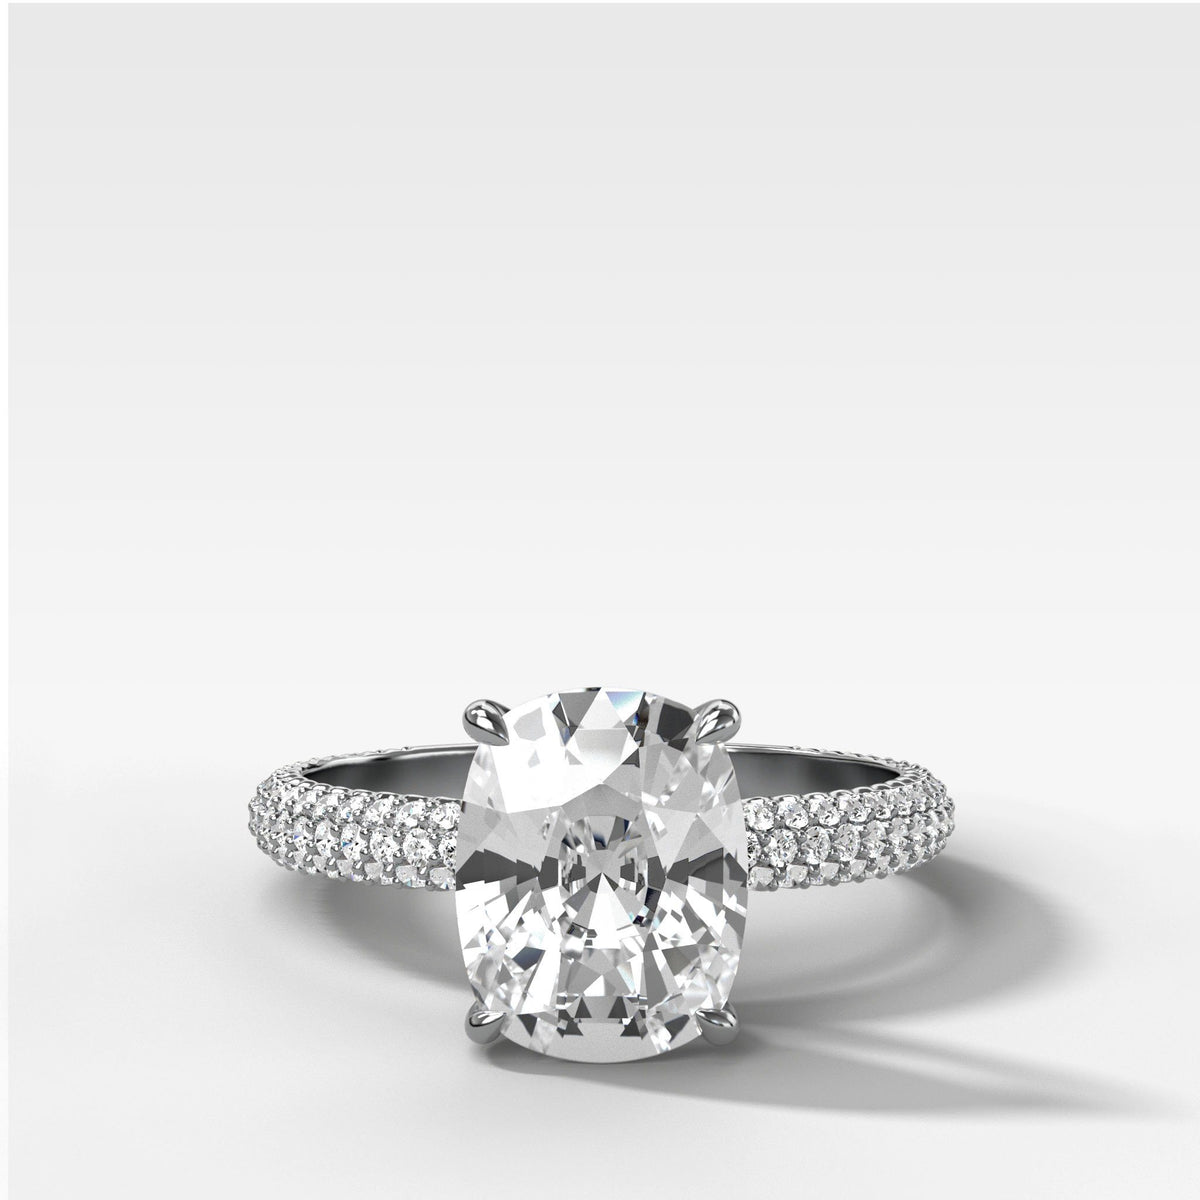 Triple Row Pavé Engagement Ring With Elongated Cushion Cut by Good Stone in White Gold